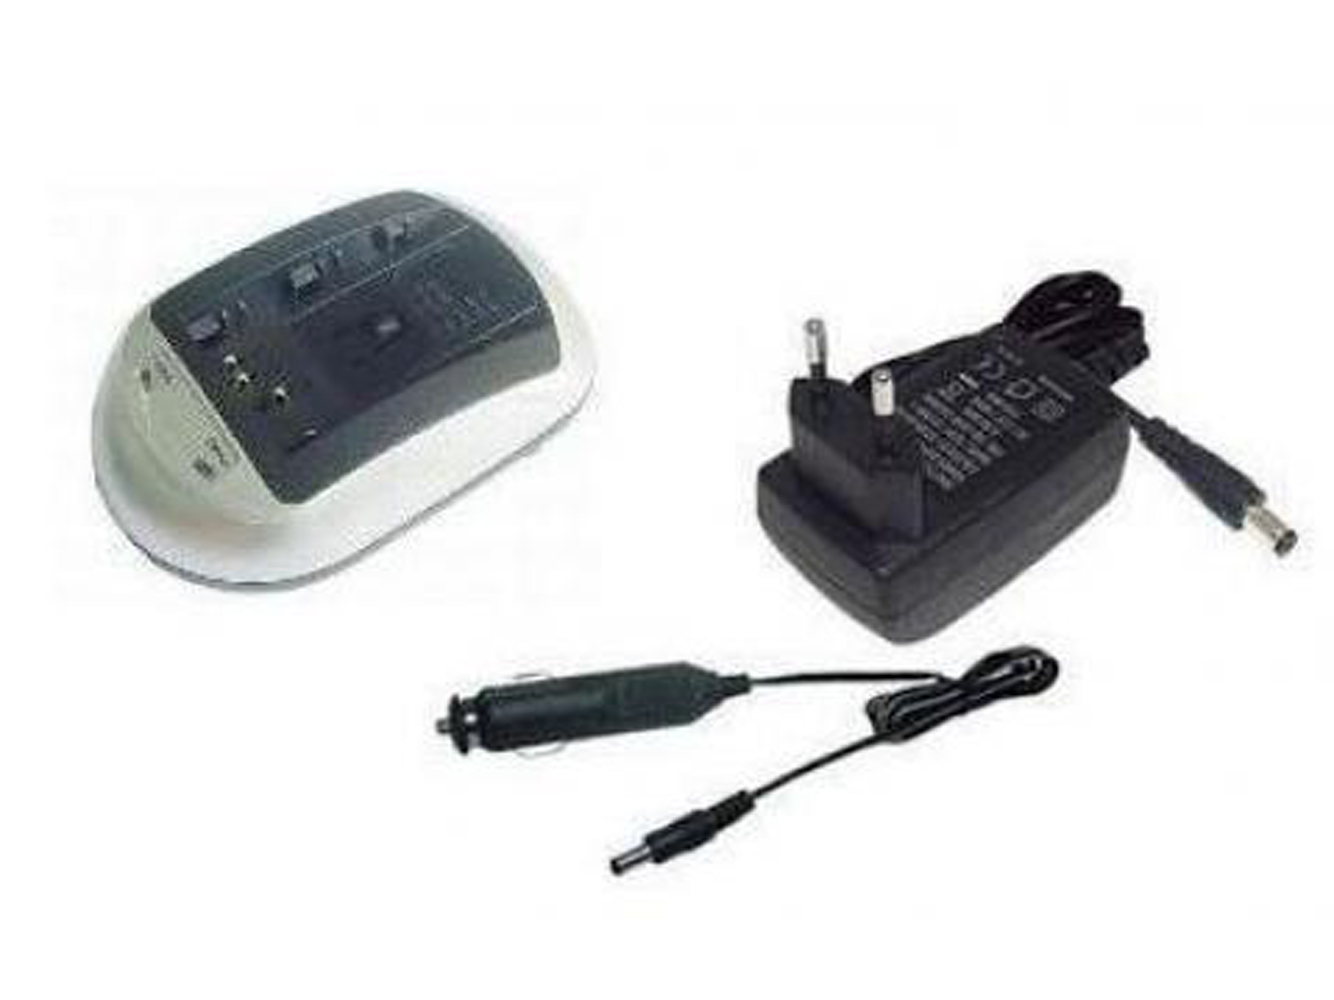 Canon Bp-508, Bp-511 Battery Chargers For Dm-mv100x, Dm-mv100xi replacement